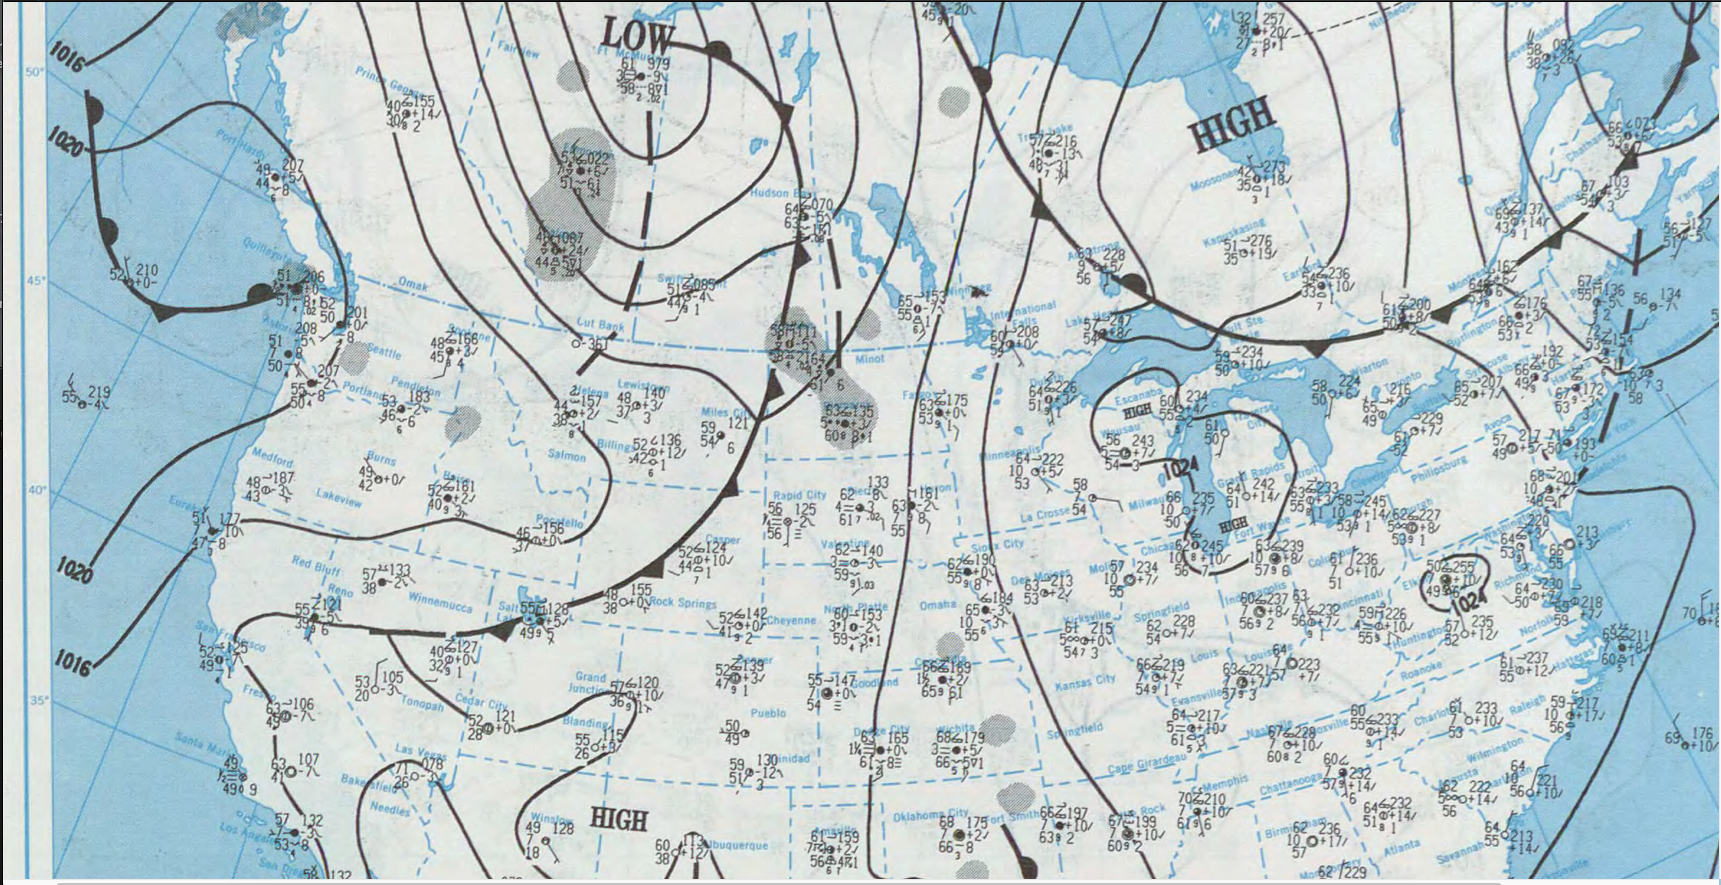 June 8, 1991 weather map - pressure systems